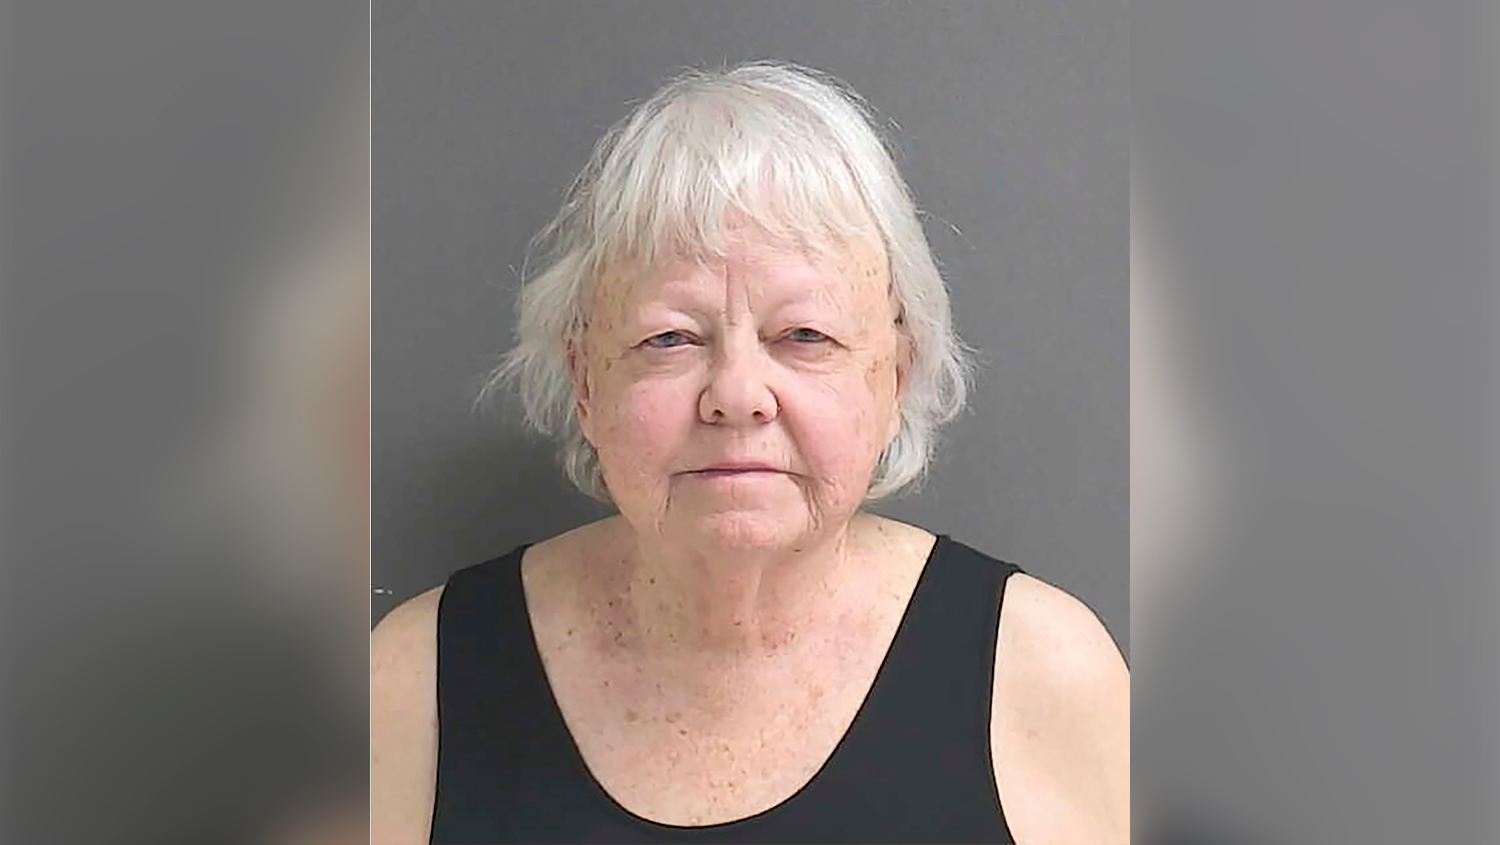 This Jan. 21, 2023, booking photo provided by the Volusia County, Fla., Division of Corrections shows Ellen Gilland. Gilland, who is accused of fatally shooting her terminally ill husband in a Florida hospital, was released on $150,000 bond Friday, March 3, 2023.